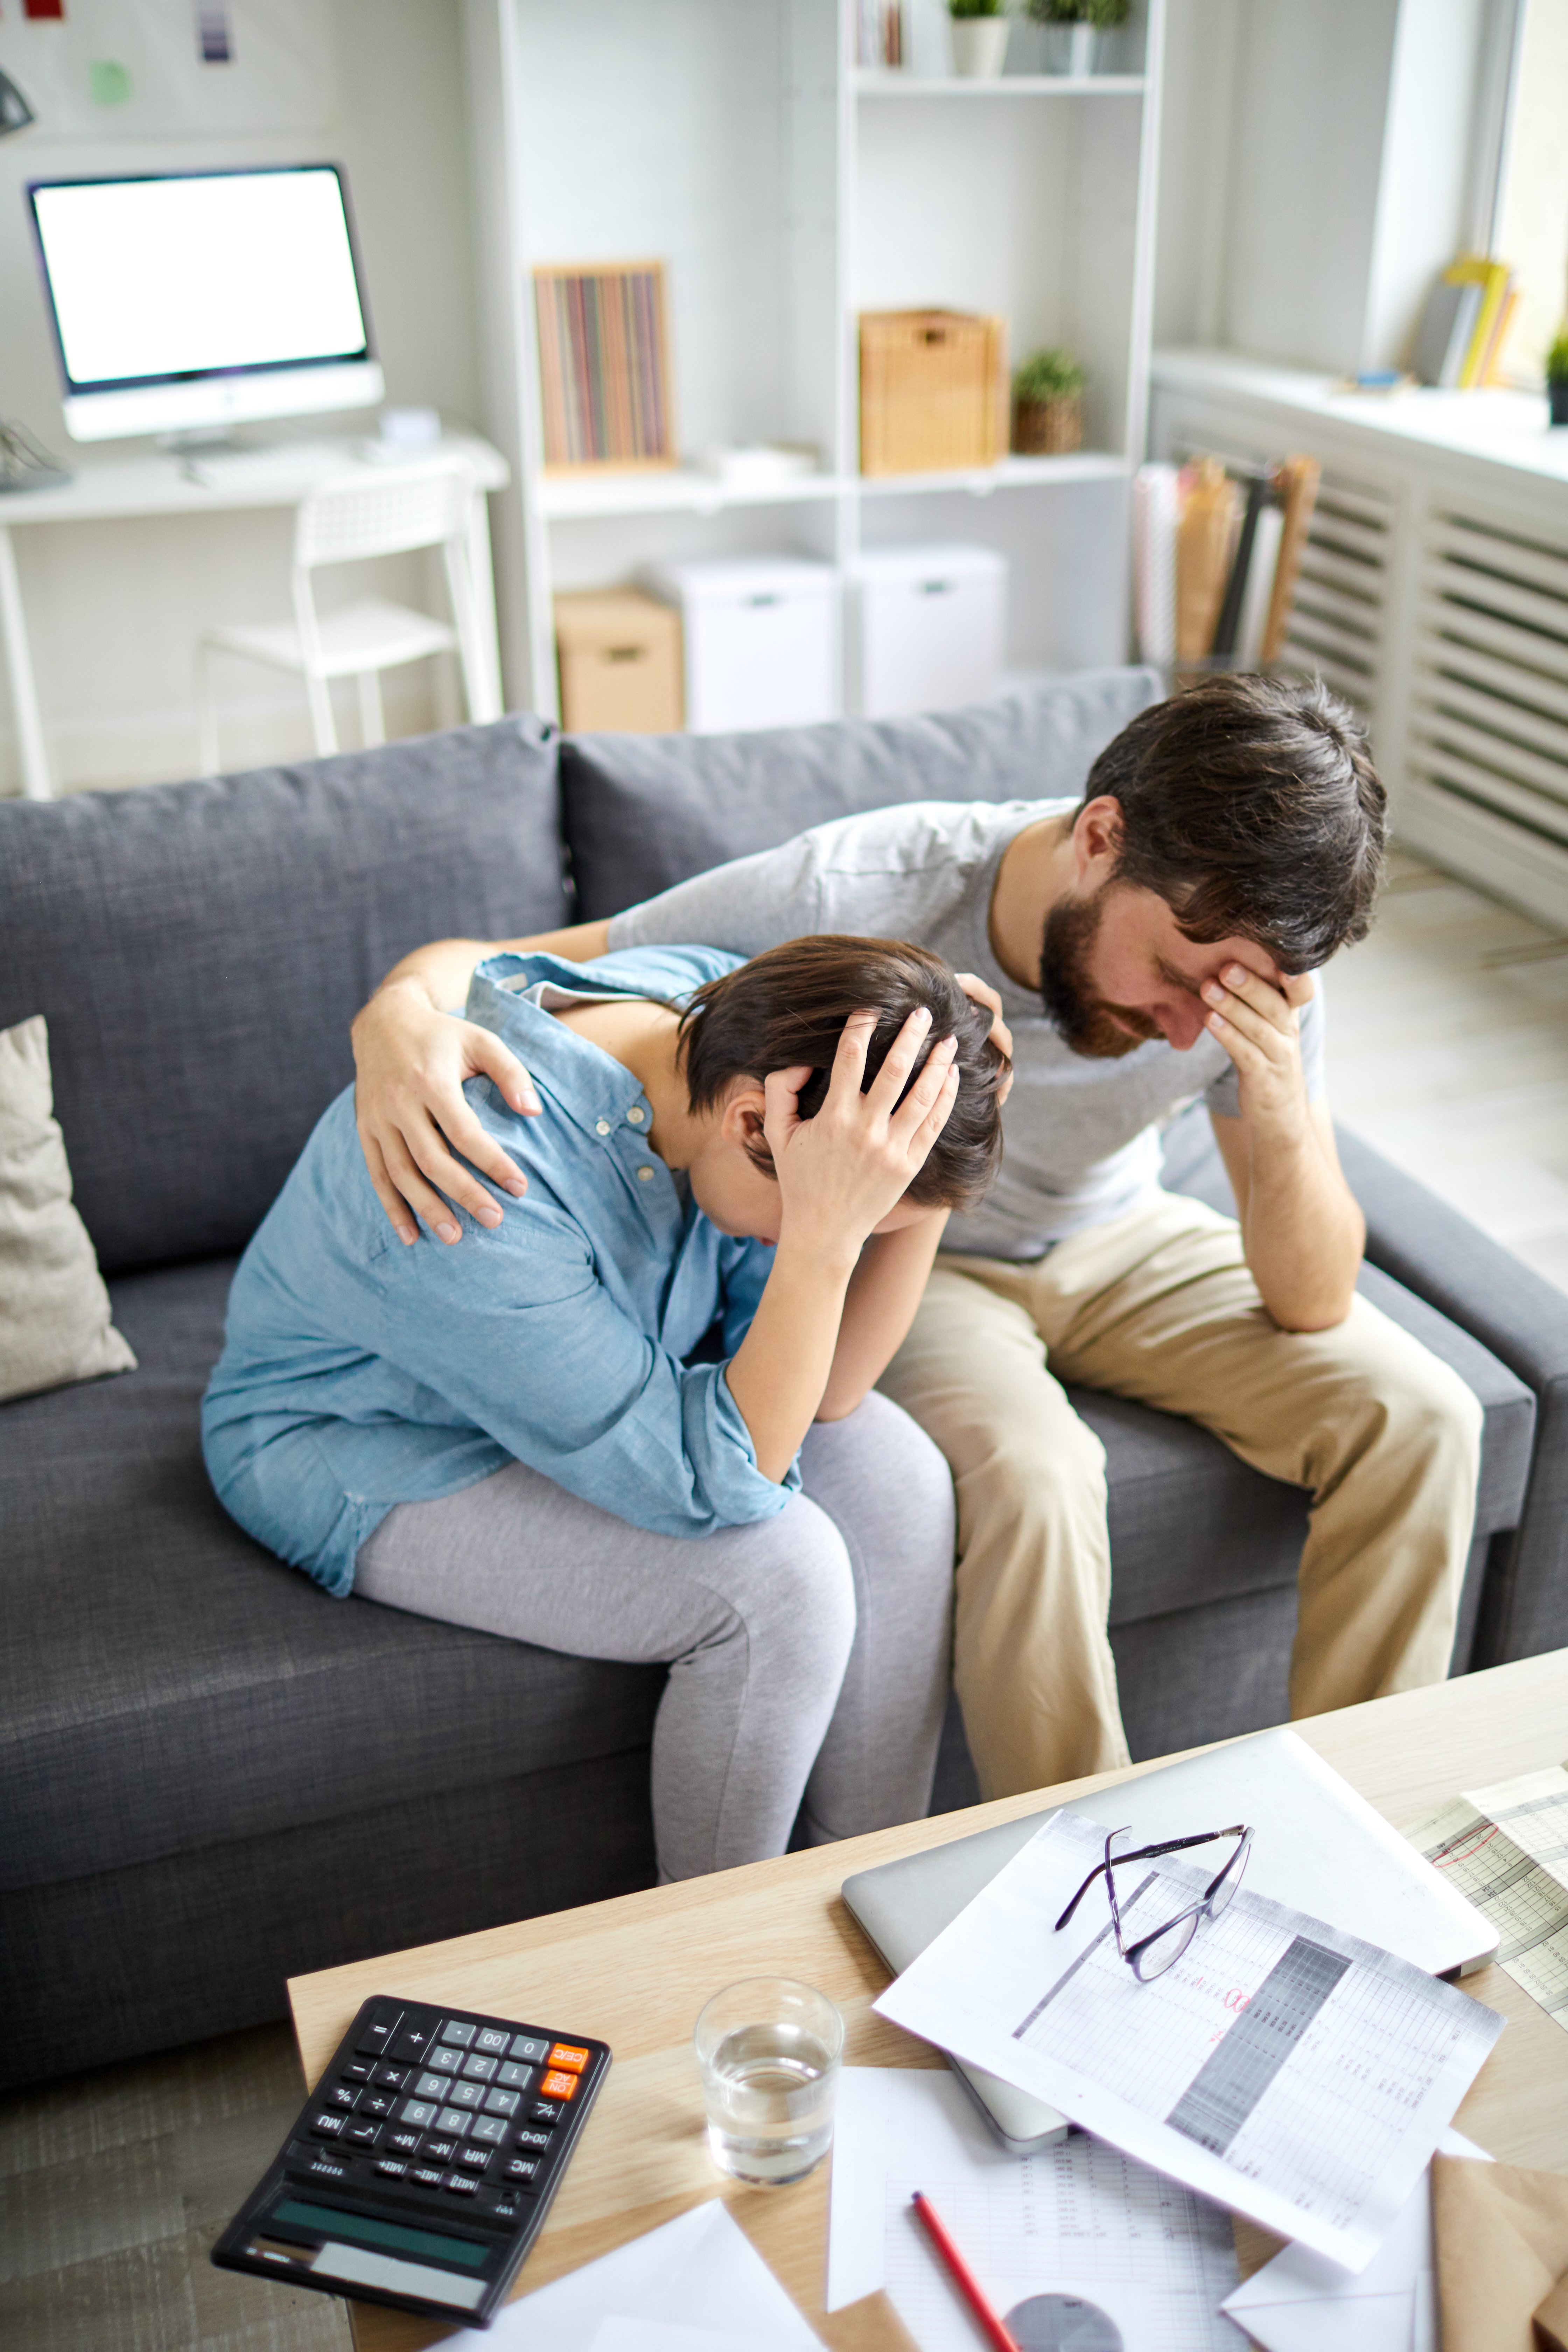 Distraught man wraps his arm around a distraught woman | Source: Shutterstock